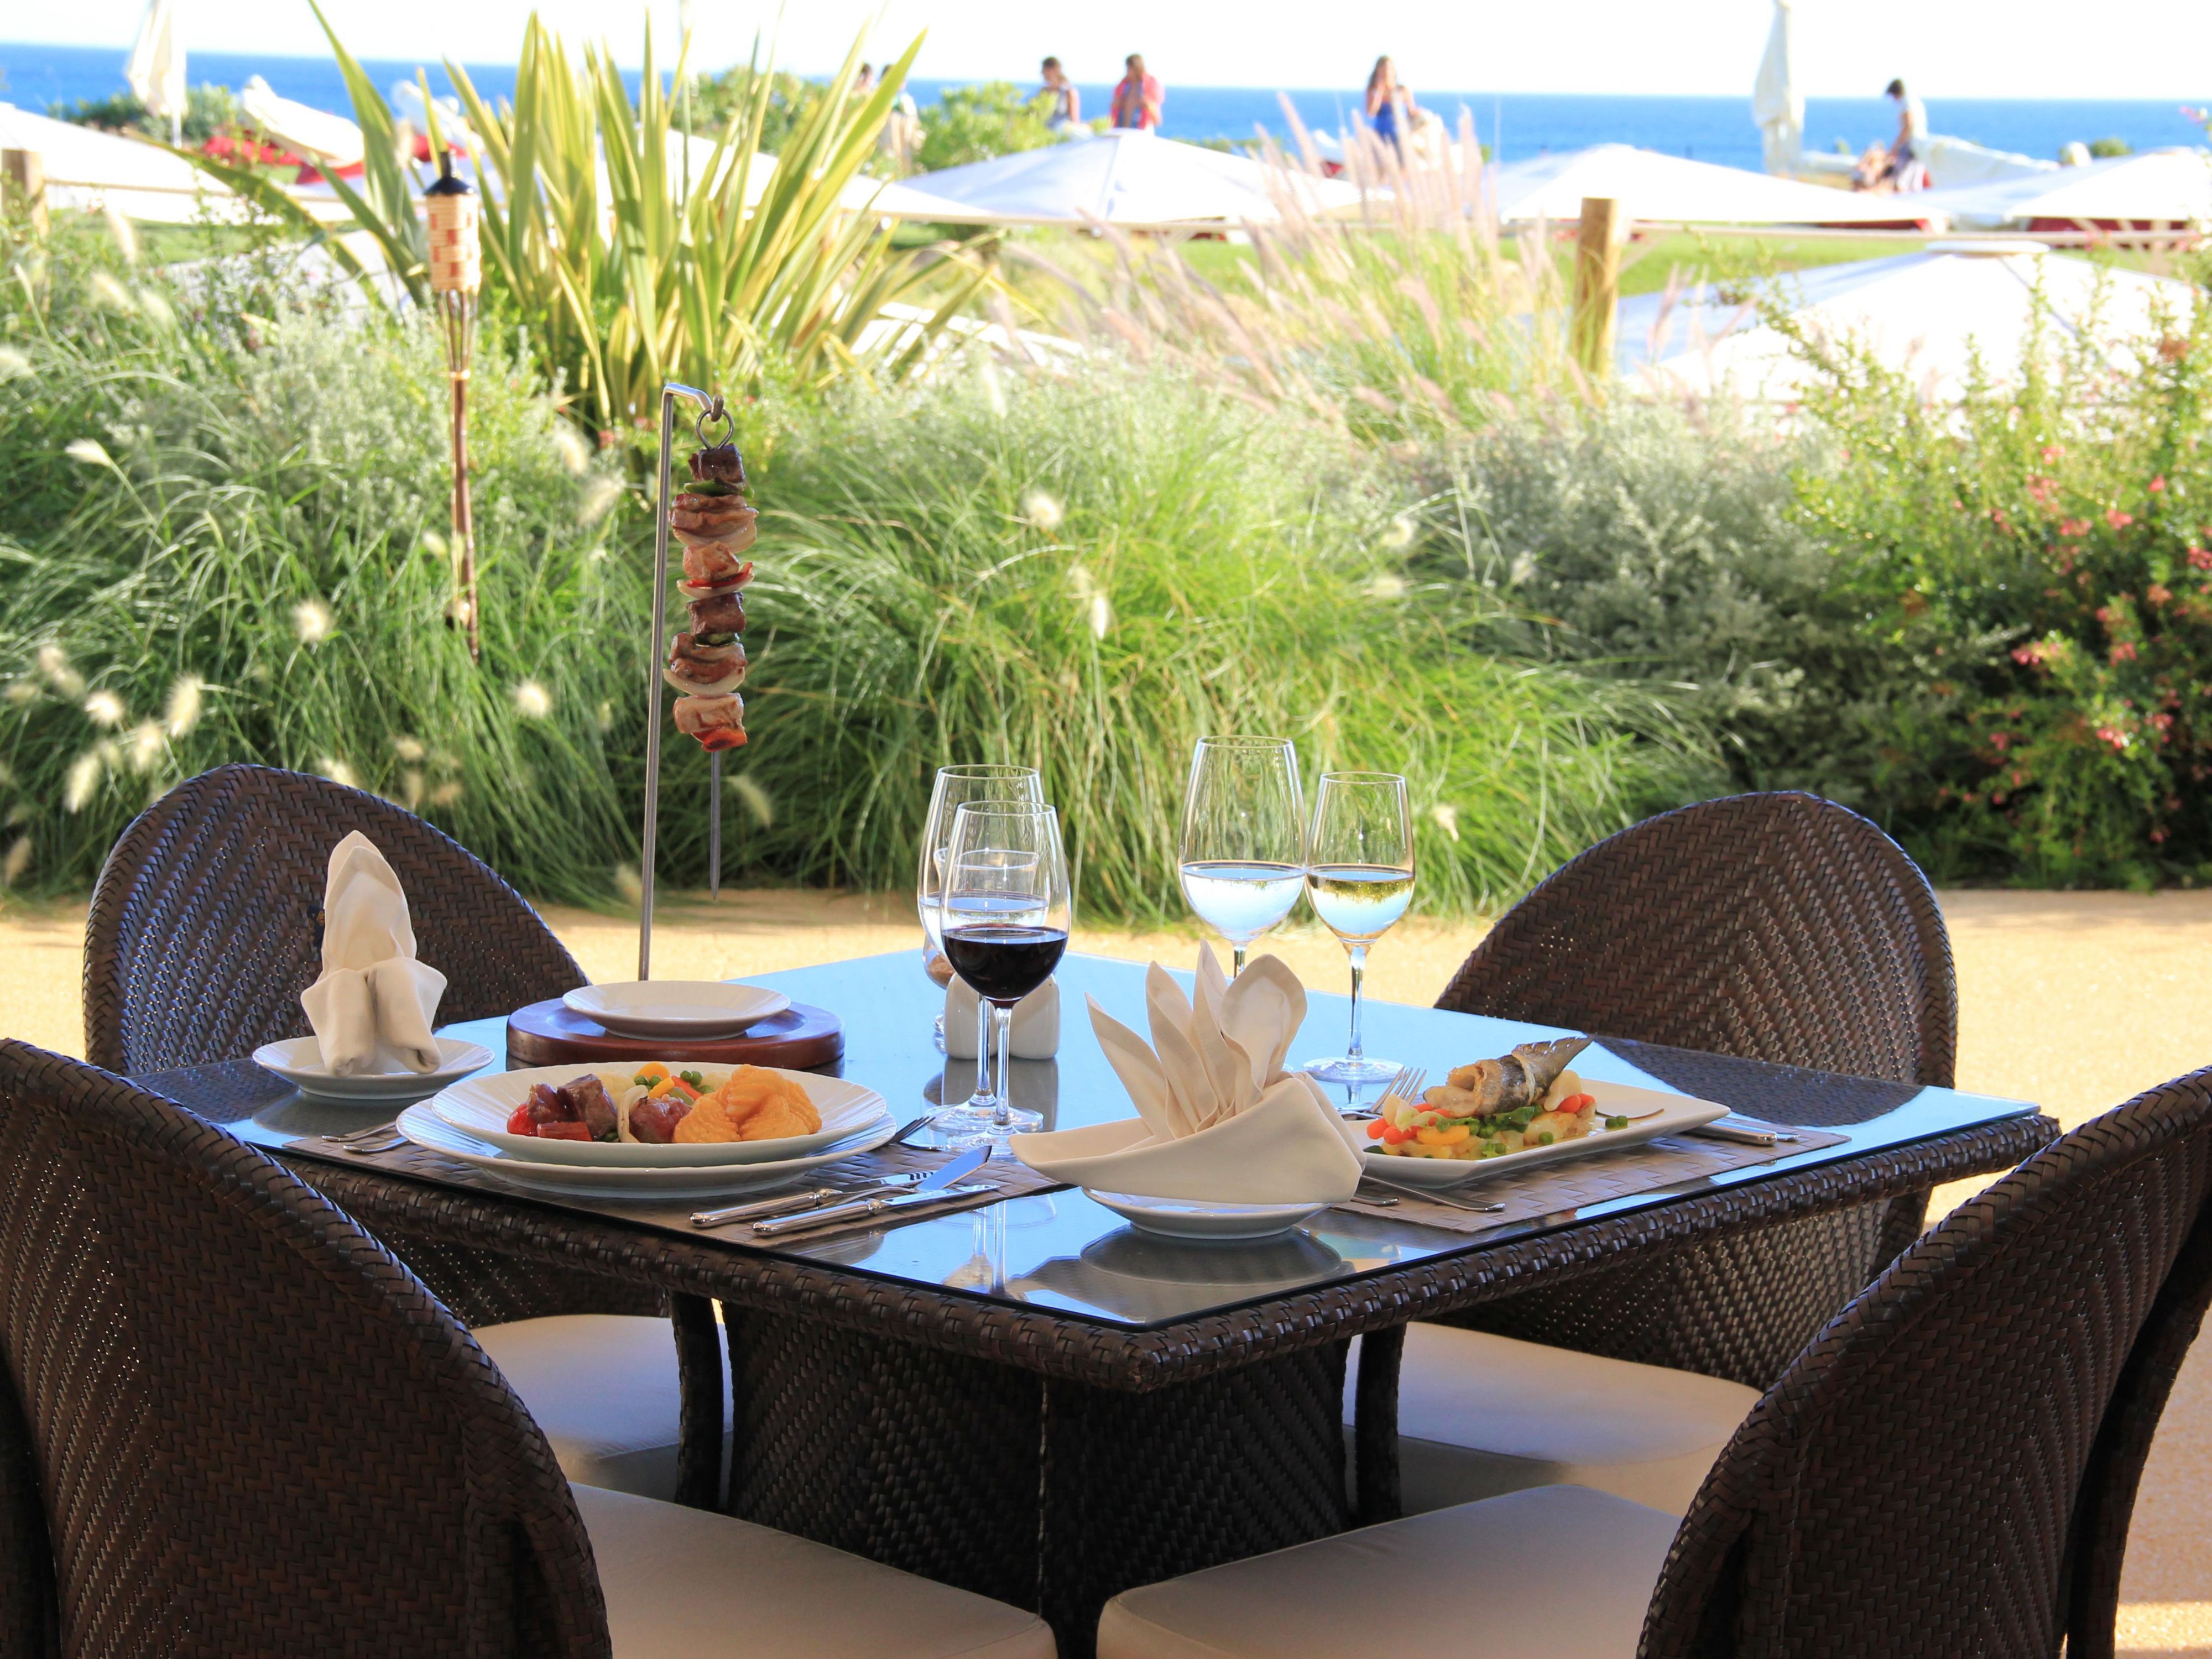 Summer is a wonderful time to enjoy exquisite cuisine with picturesque view in our beachfront restaurant. Book a table right now and good mood is guaranteed!